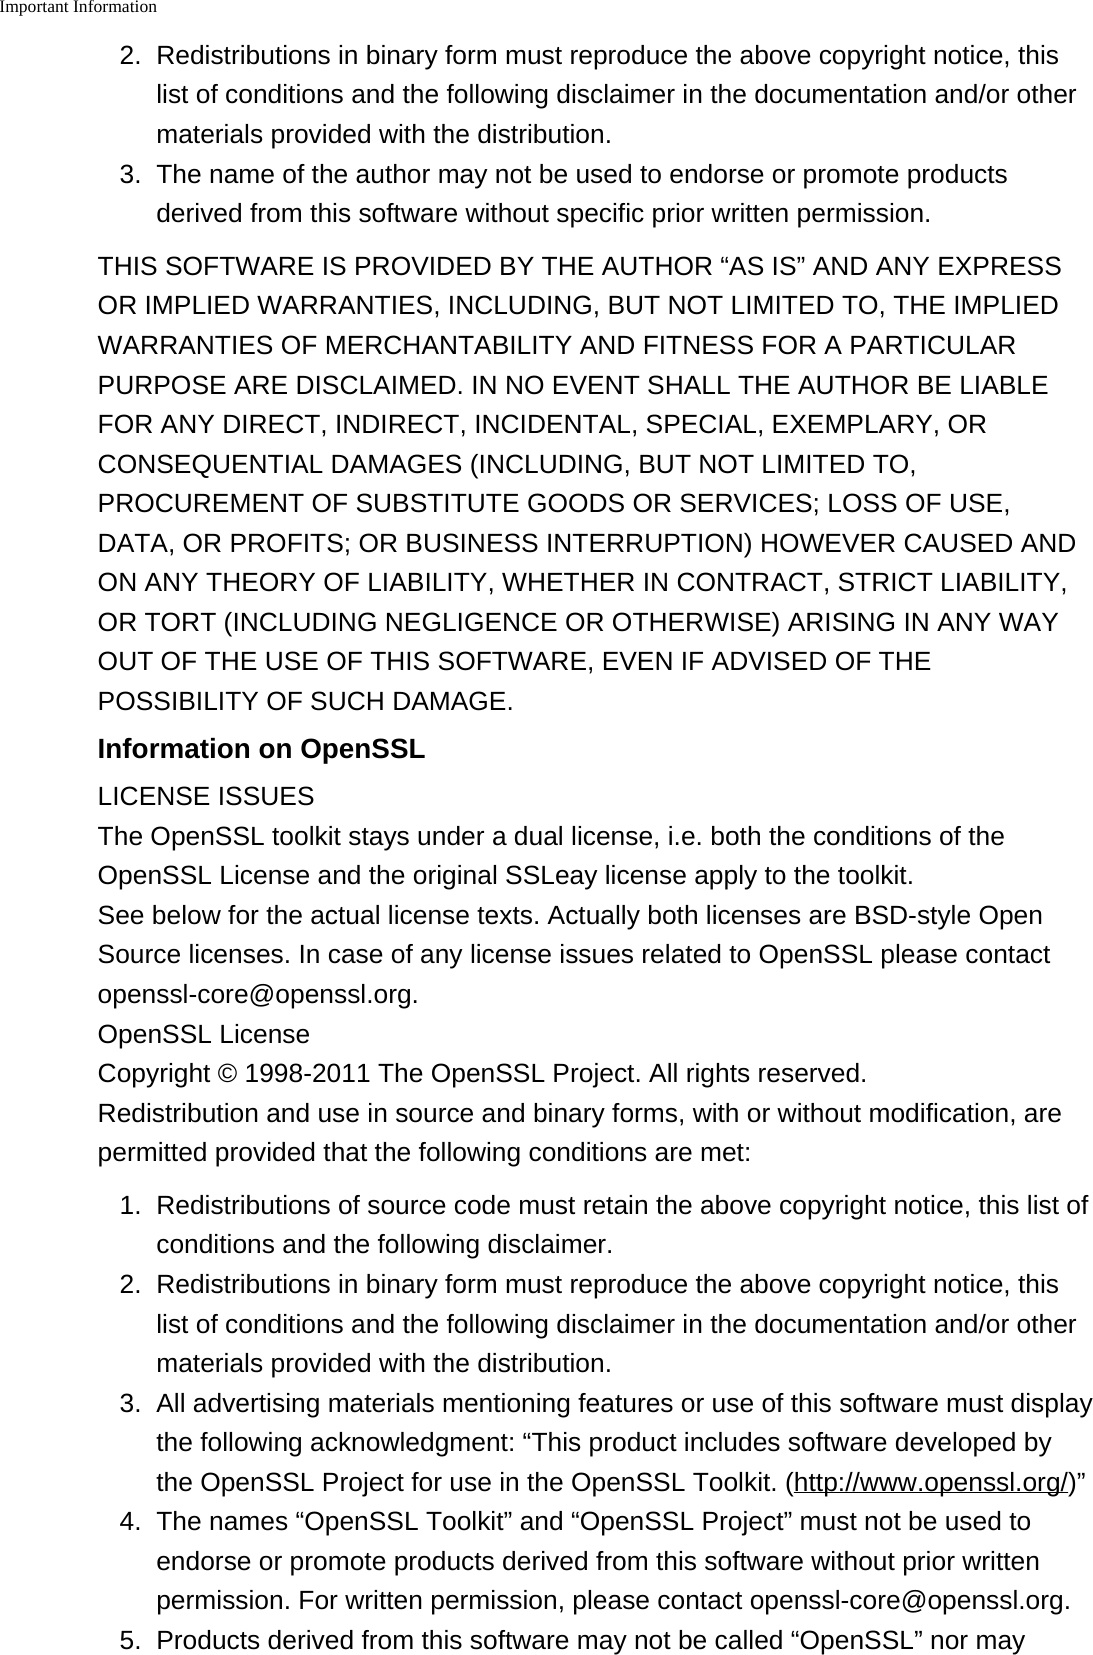 Important Information2. Redistributions in binary form must reproduce the above copyright notice, thislist of conditions and the following disclaimer in the documentation and/or othermaterials provided with the distribution.3. The name of the author may not be used to endorse or promote productsderived from this software without specific prior written permission.THIS SOFTWARE IS PROVIDED BY THE AUTHOR “AS IS” AND ANY EXPRESSOR IMPLIED WARRANTIES, INCLUDING, BUT NOT LIMITED TO, THE IMPLIEDWARRANTIES OF MERCHANTABILITY AND FITNESS FOR A PARTICULARPURPOSE ARE DISCLAIMED. IN NO EVENT SHALL THE AUTHOR BE LIABLEFOR ANY DIRECT, INDIRECT, INCIDENTAL, SPECIAL, EXEMPLARY, ORCONSEQUENTIAL DAMAGES (INCLUDING, BUT NOT LIMITED TO,PROCUREMENT OF SUBSTITUTE GOODS OR SERVICES; LOSS OF USE,DATA, OR PROFITS; OR BUSINESS INTERRUPTION) HOWEVER CAUSED ANDON ANY THEORY OF LIABILITY, WHETHER IN CONTRACT, STRICT LIABILITY,OR TORT (INCLUDING NEGLIGENCE OR OTHERWISE) ARISING IN ANY WAYOUT OF THE USE OF THIS SOFTWARE, EVEN IF ADVISED OF THEPOSSIBILITY OF SUCH DAMAGE.Information on OpenSSLLICENSE ISSUESThe OpenSSL toolkit stays under a dual license, i.e. both the conditions of theOpenSSL License and the original SSLeay license apply to the toolkit.See below for the actual license texts. Actually both licenses are BSD-style OpenSource licenses. In case of any license issues related to OpenSSL please contactopenssl-core@openssl.org.OpenSSL LicenseCopyright © 1998-2011 The OpenSSL Project. All rights reserved.Redistribution and use in source and binary forms, with or without modification, arepermitted provided that the following conditions are met:1. Redistributions of source code must retain the above copyright notice, this list ofconditions and the following disclaimer.2.Redistributions in binary form must reproduce the above copyright notice, thislist of conditions and the following disclaimer in the documentation and/or othermaterials provided with the distribution.3. All advertising materials mentioning features or use of this software must displaythe following acknowledgment: “This product includes software developed bythe OpenSSL Project for use in the OpenSSL Toolkit. (http://www.openssl.org/)”4.The names “OpenSSL Toolkit” and “OpenSSL Project” must not be used toendorse or promote products derived from this software without prior writtenpermission. For written permission, please contact openssl-core@openssl.org.5. Products derived from this software may not be called “OpenSSL” nor may